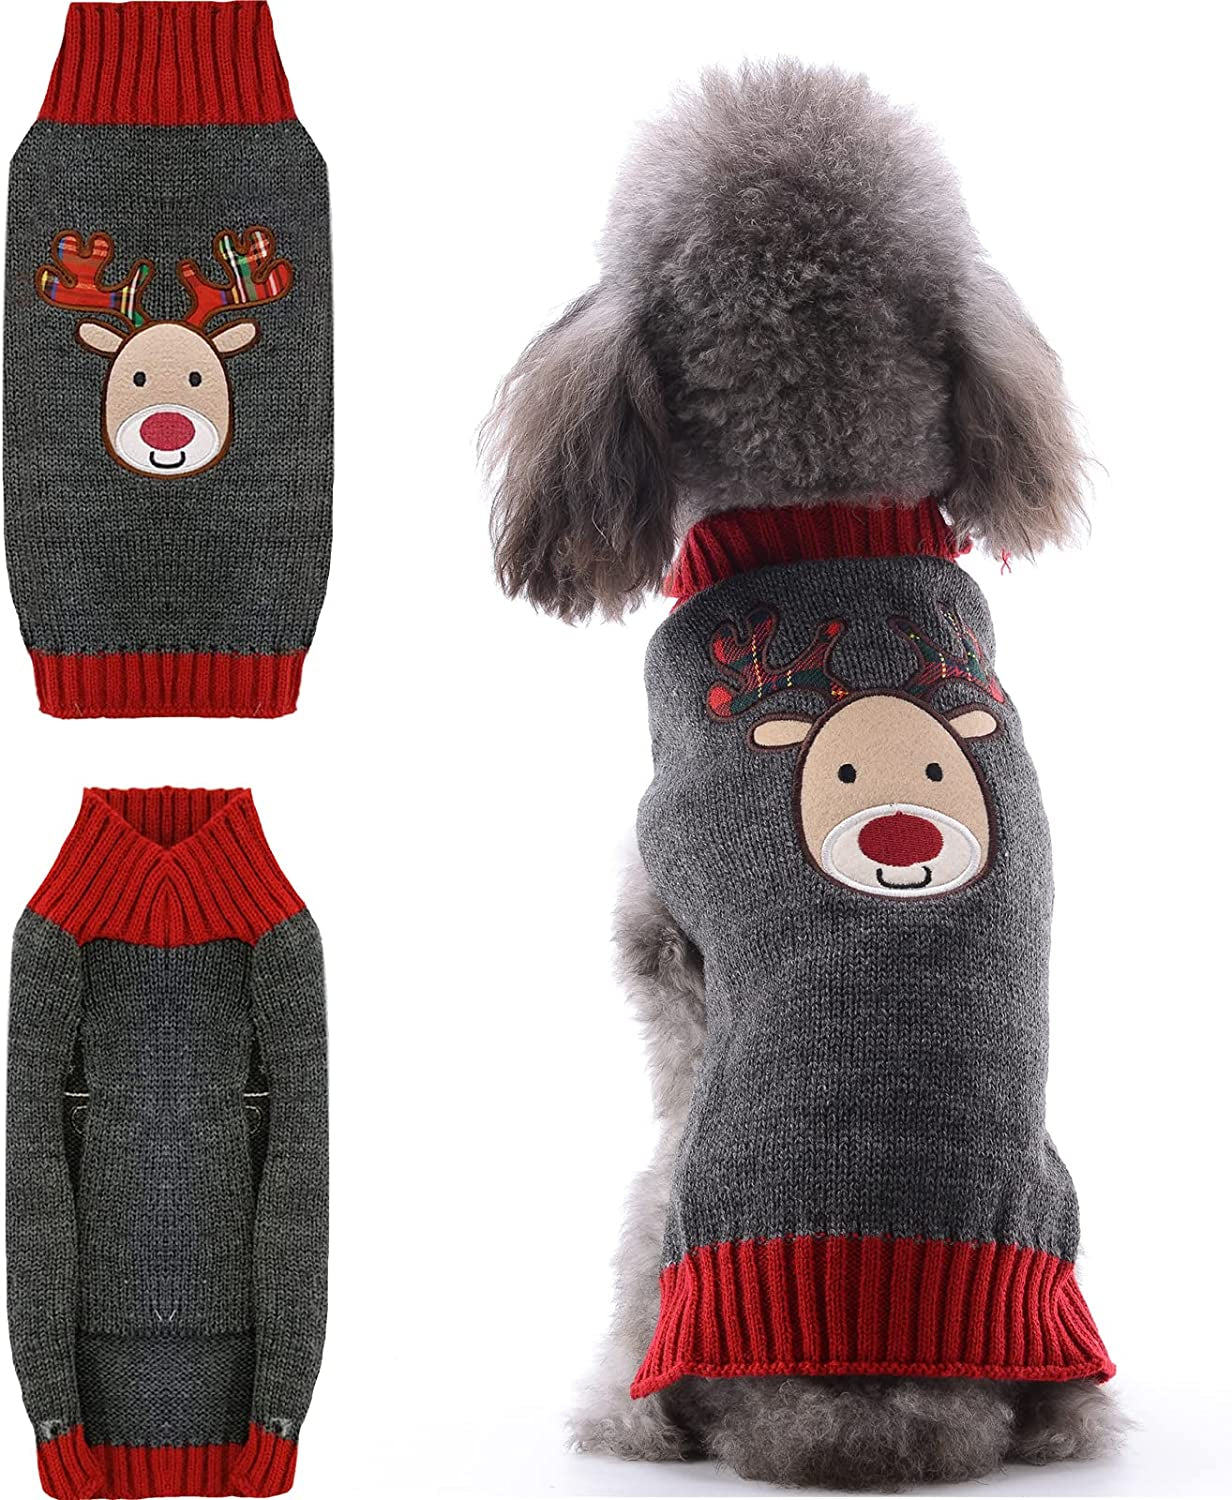 TENGZHI Dog Christmas Sweater Ugly Xmas Puppy Clothes Costume Warm Knitted Cat Outfit Jumper Cute Reindeer Pet Clothing for Small Medium Large Dogs Cats（S,Black） Animals & Pet Supplies > Pet Supplies > Dog Supplies > Dog Apparel Yi Wu Shi Teng Zhi Dian Zi Shang Wu You Xian Gong Si Gray Reindeer X-Large 